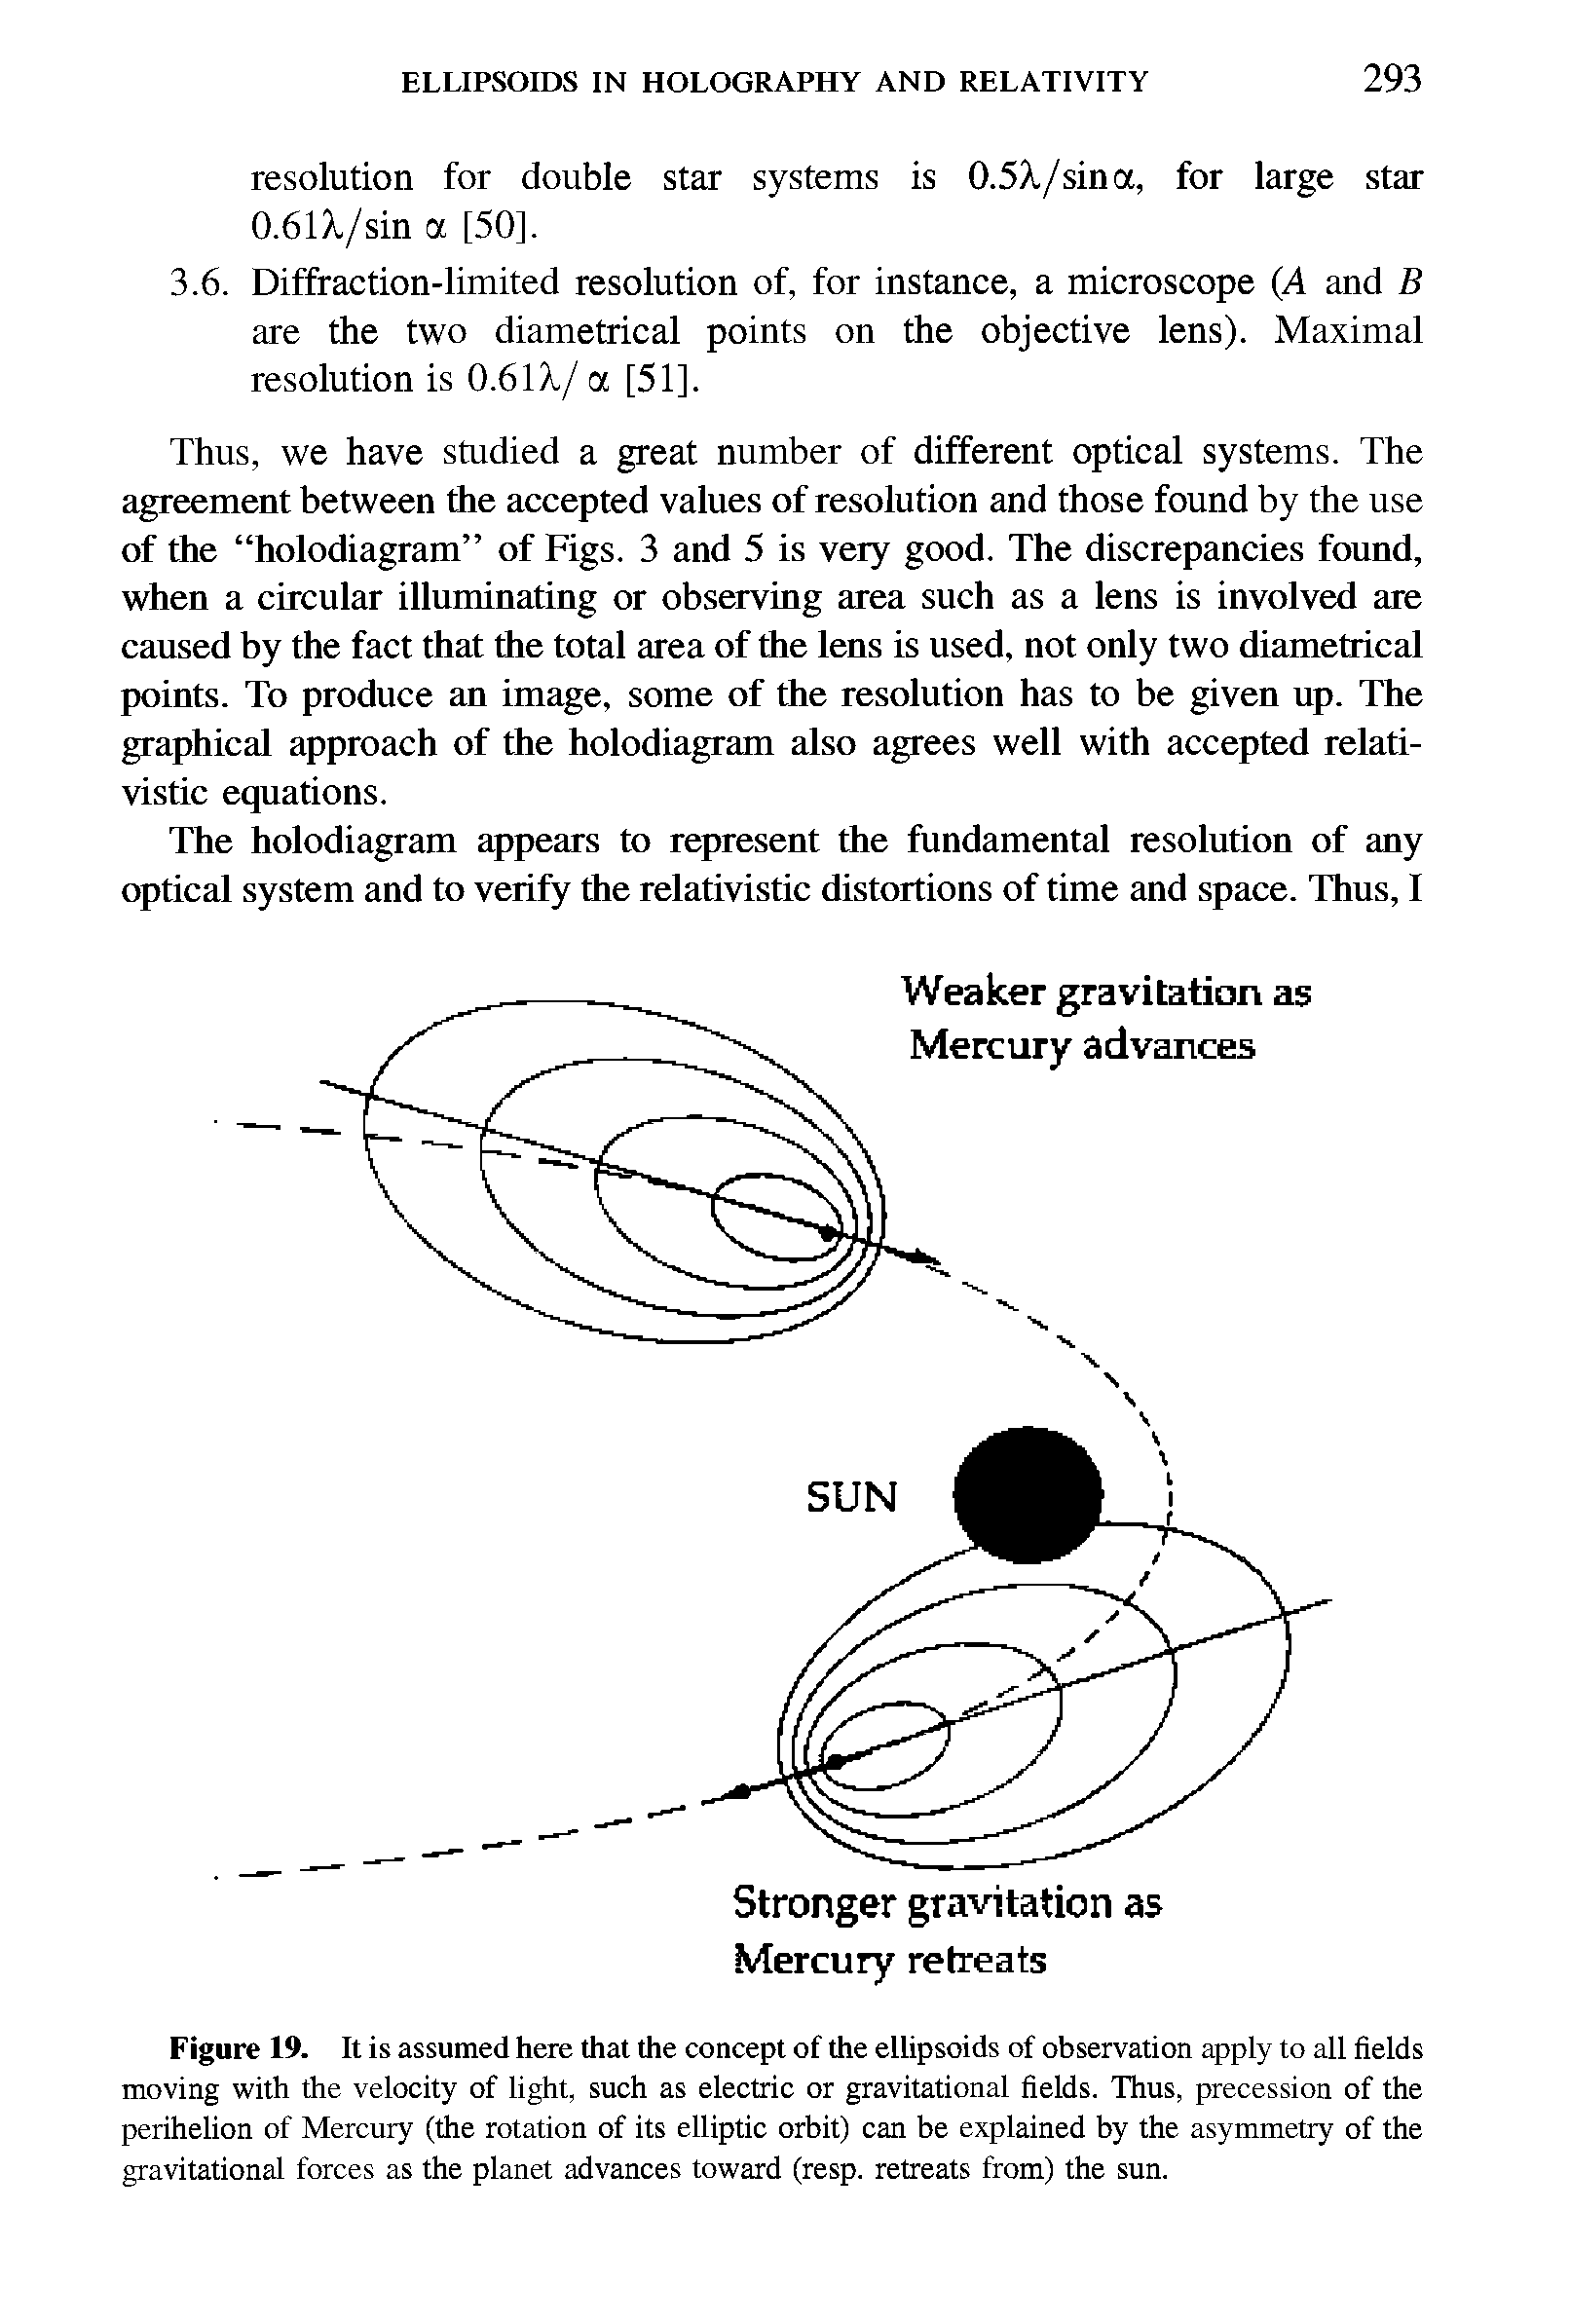 Figure 19. It is assumed here that the concept of the ellipsoids of observation apply to all fields moving with the velocity of light, such as electric or gravitational fields. Thus, precession of the perihelion of Mercury (the rotation of its elliptic orbit) can be explained by the asymmetry of the gravitational forces as the planet advances toward (resp. retreats from) the sun.